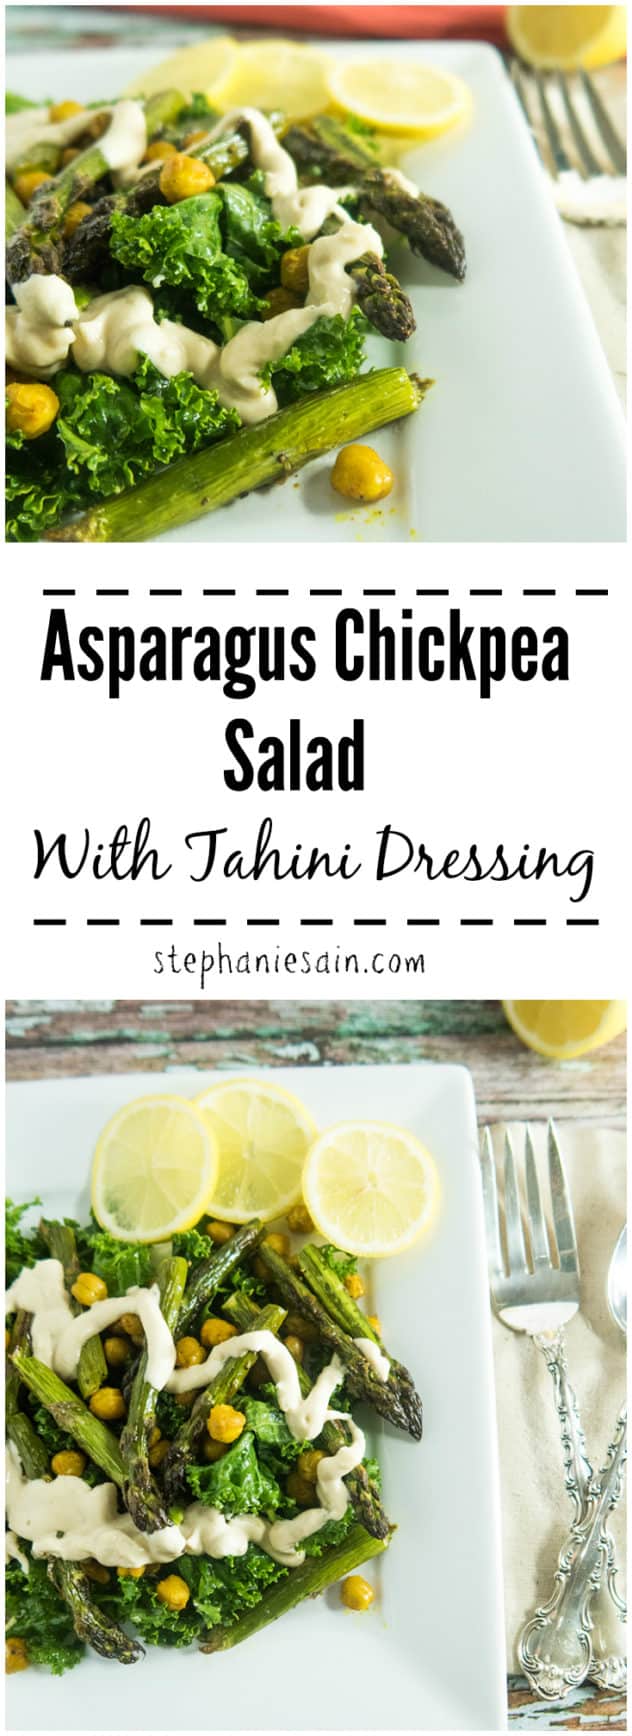 Asparagus Chickpea Salad with Tahini Dressing is an easy, tasty, one bowl meal loaded with roasted asparagus and turmeric roasted chickpeas. Vegan & Gluten Free.